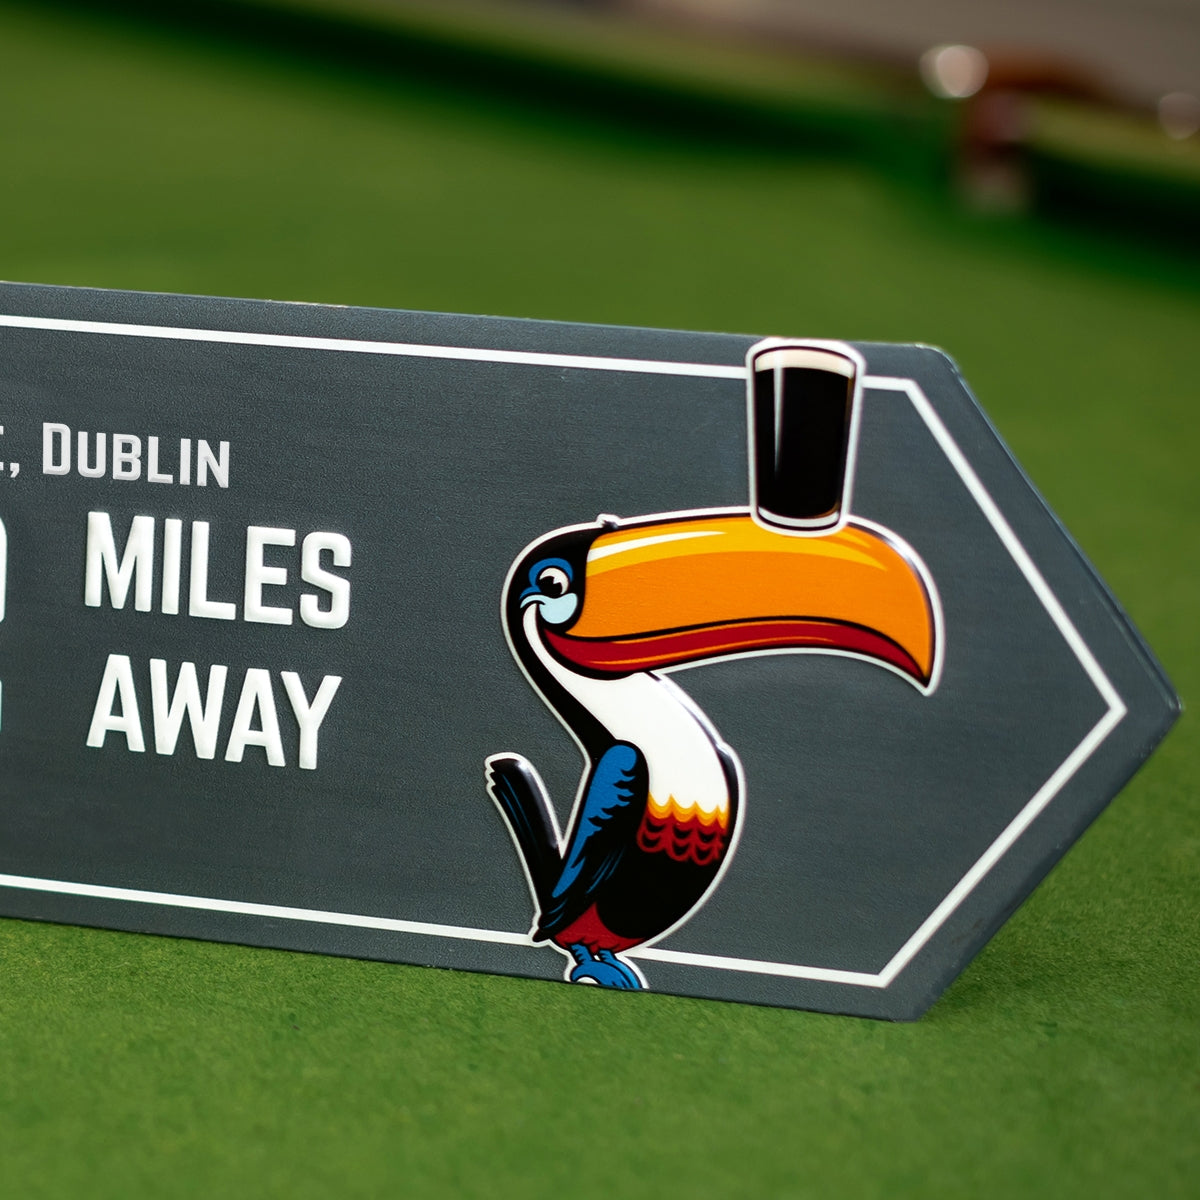 A Guinness Open Gate Brewery Arrow Metal Sign featuring a toucan with a hat on it, promoting Guinness and the Open Gate Brewery.